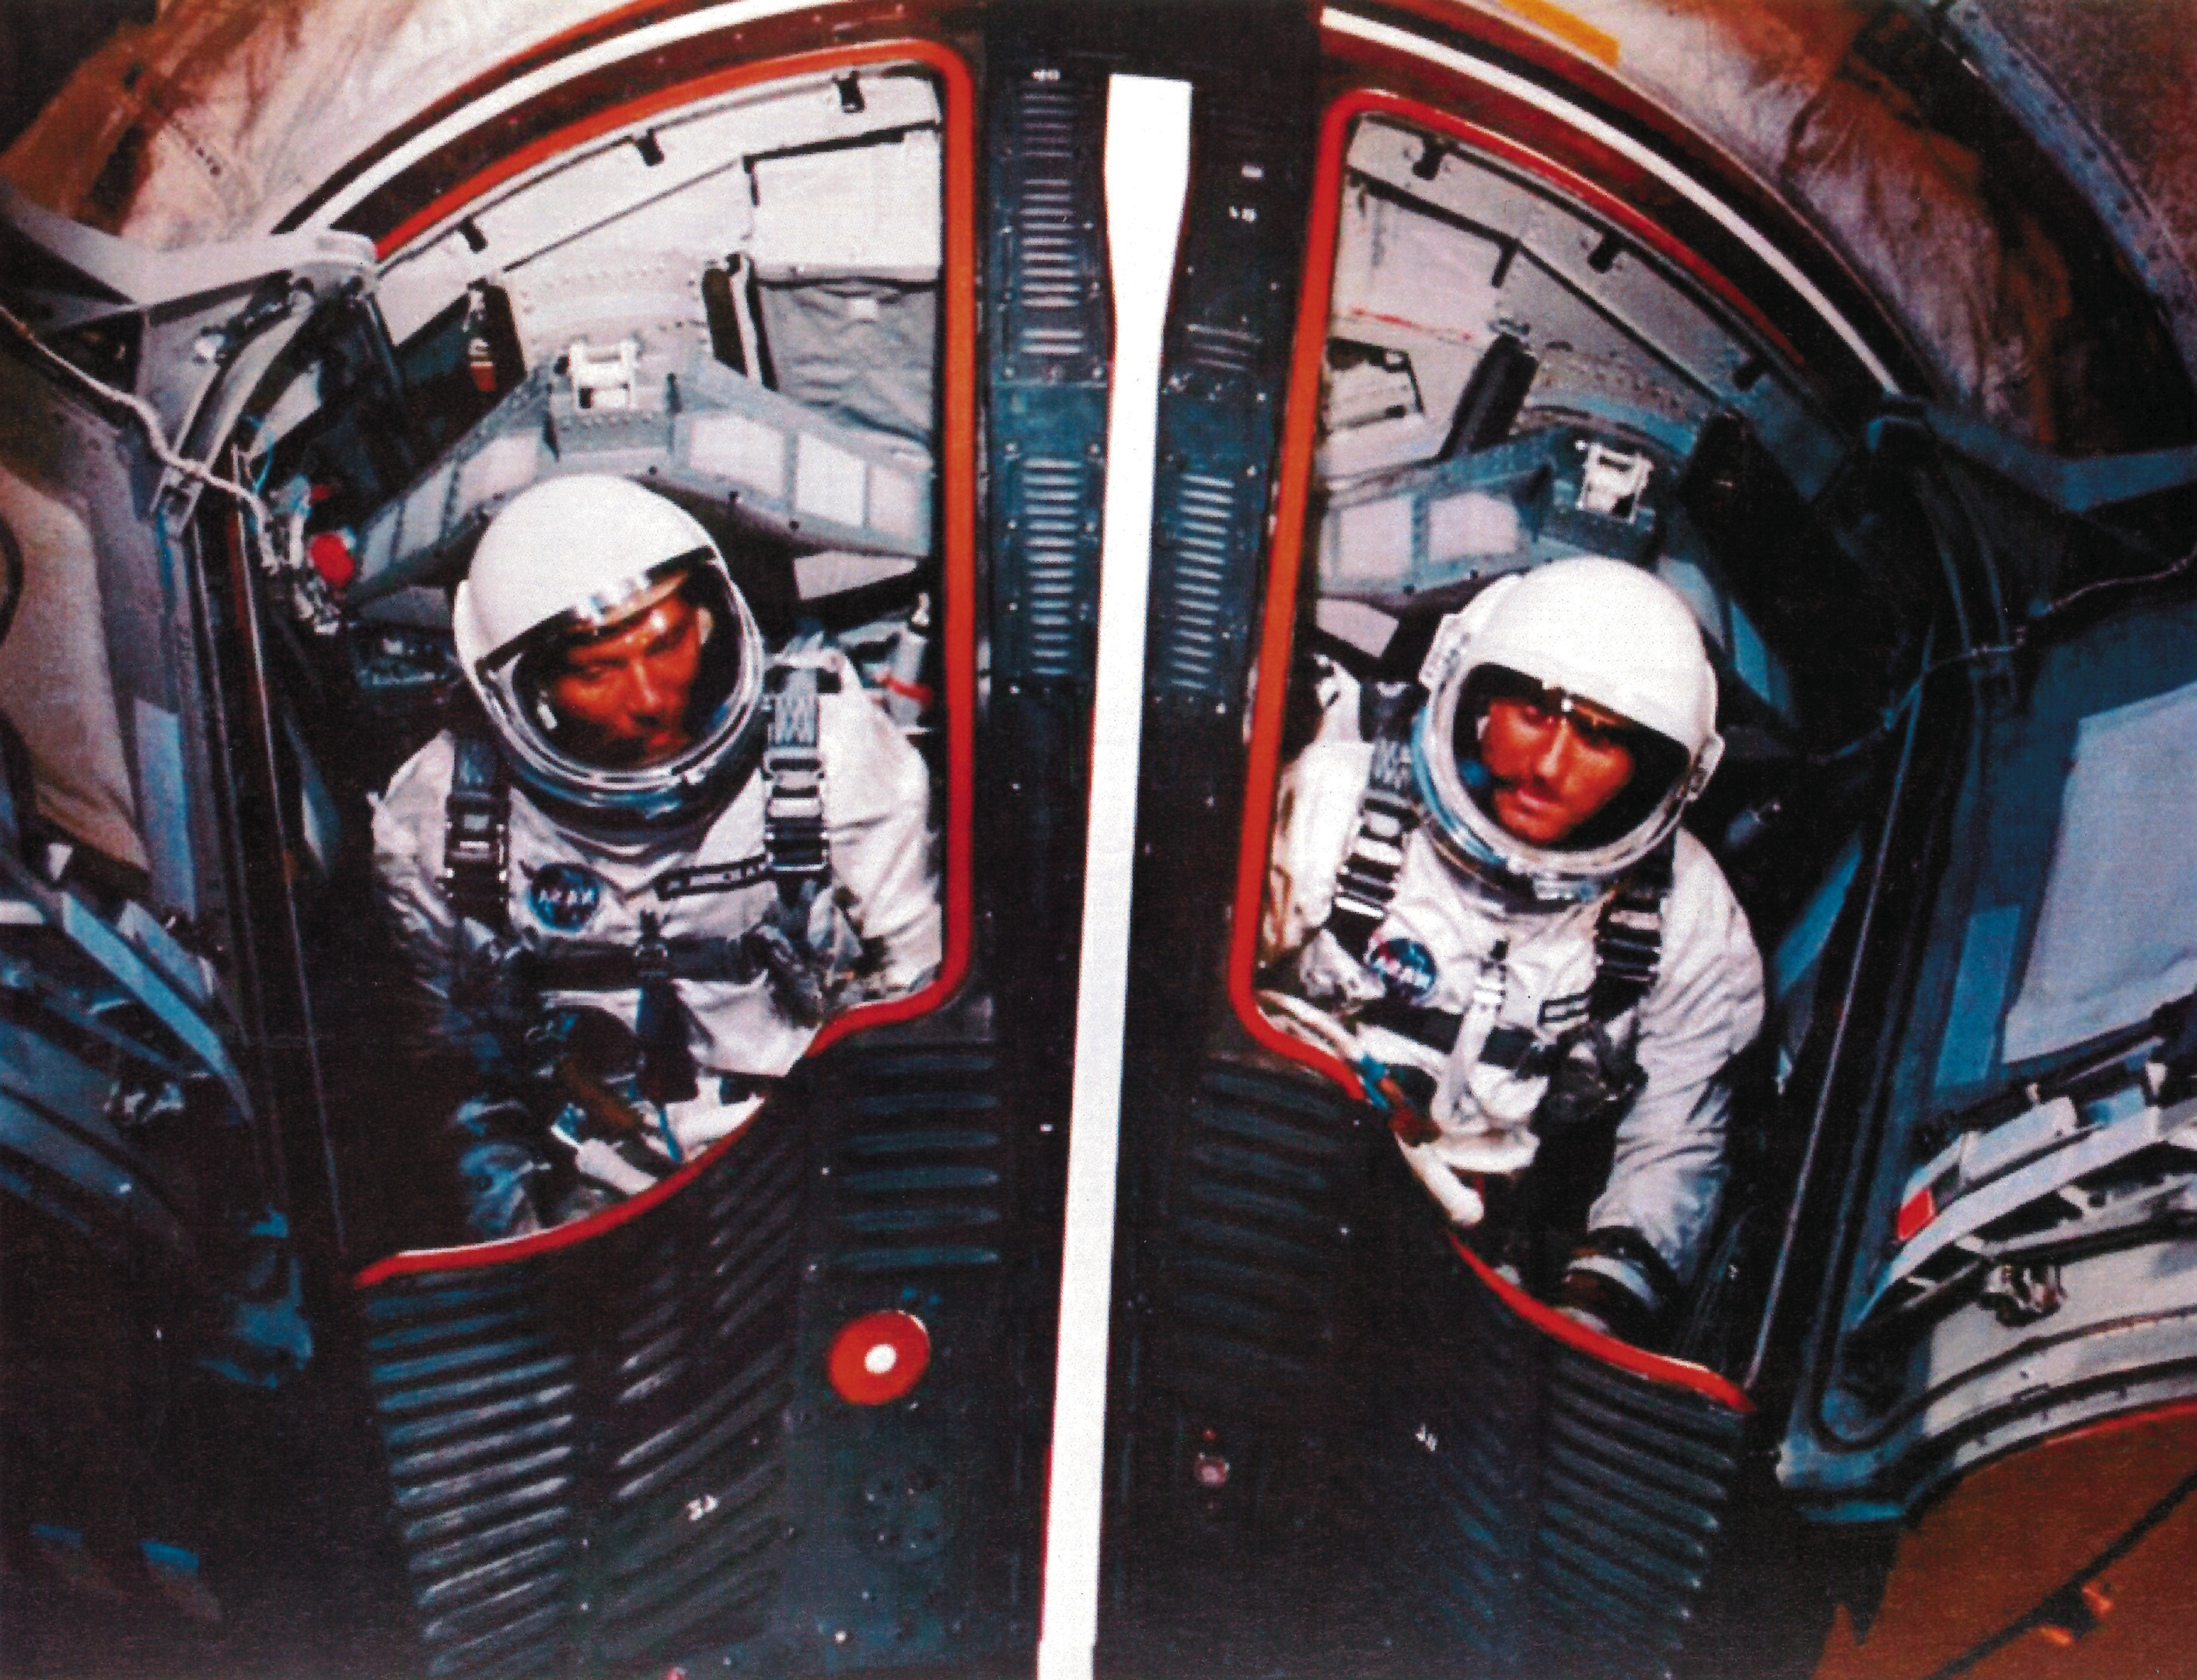 Astronaut Walter Schirra, commander of the backup team for the first Gemini flight and Major Tom Stafford, right, wait in the capsule prior to the Gemini 6 launch.